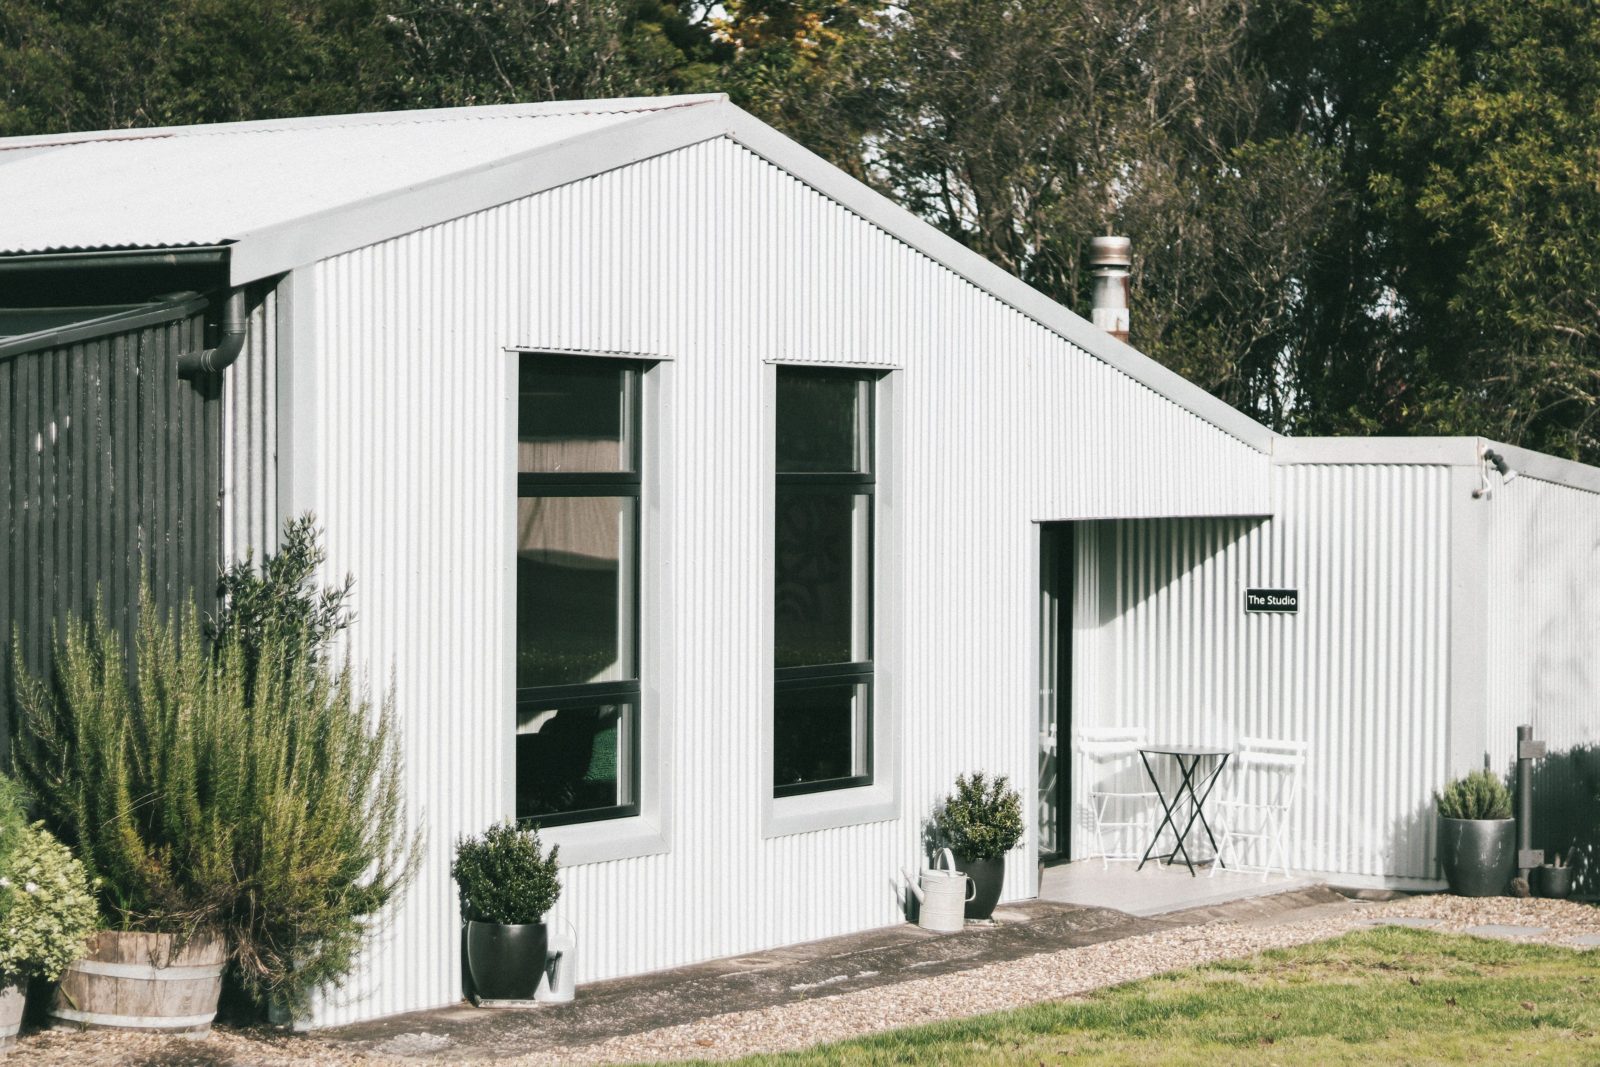 Woodland Studio is a beautifully refurbished farm building on a 10 hectare farm at Exeter NSW